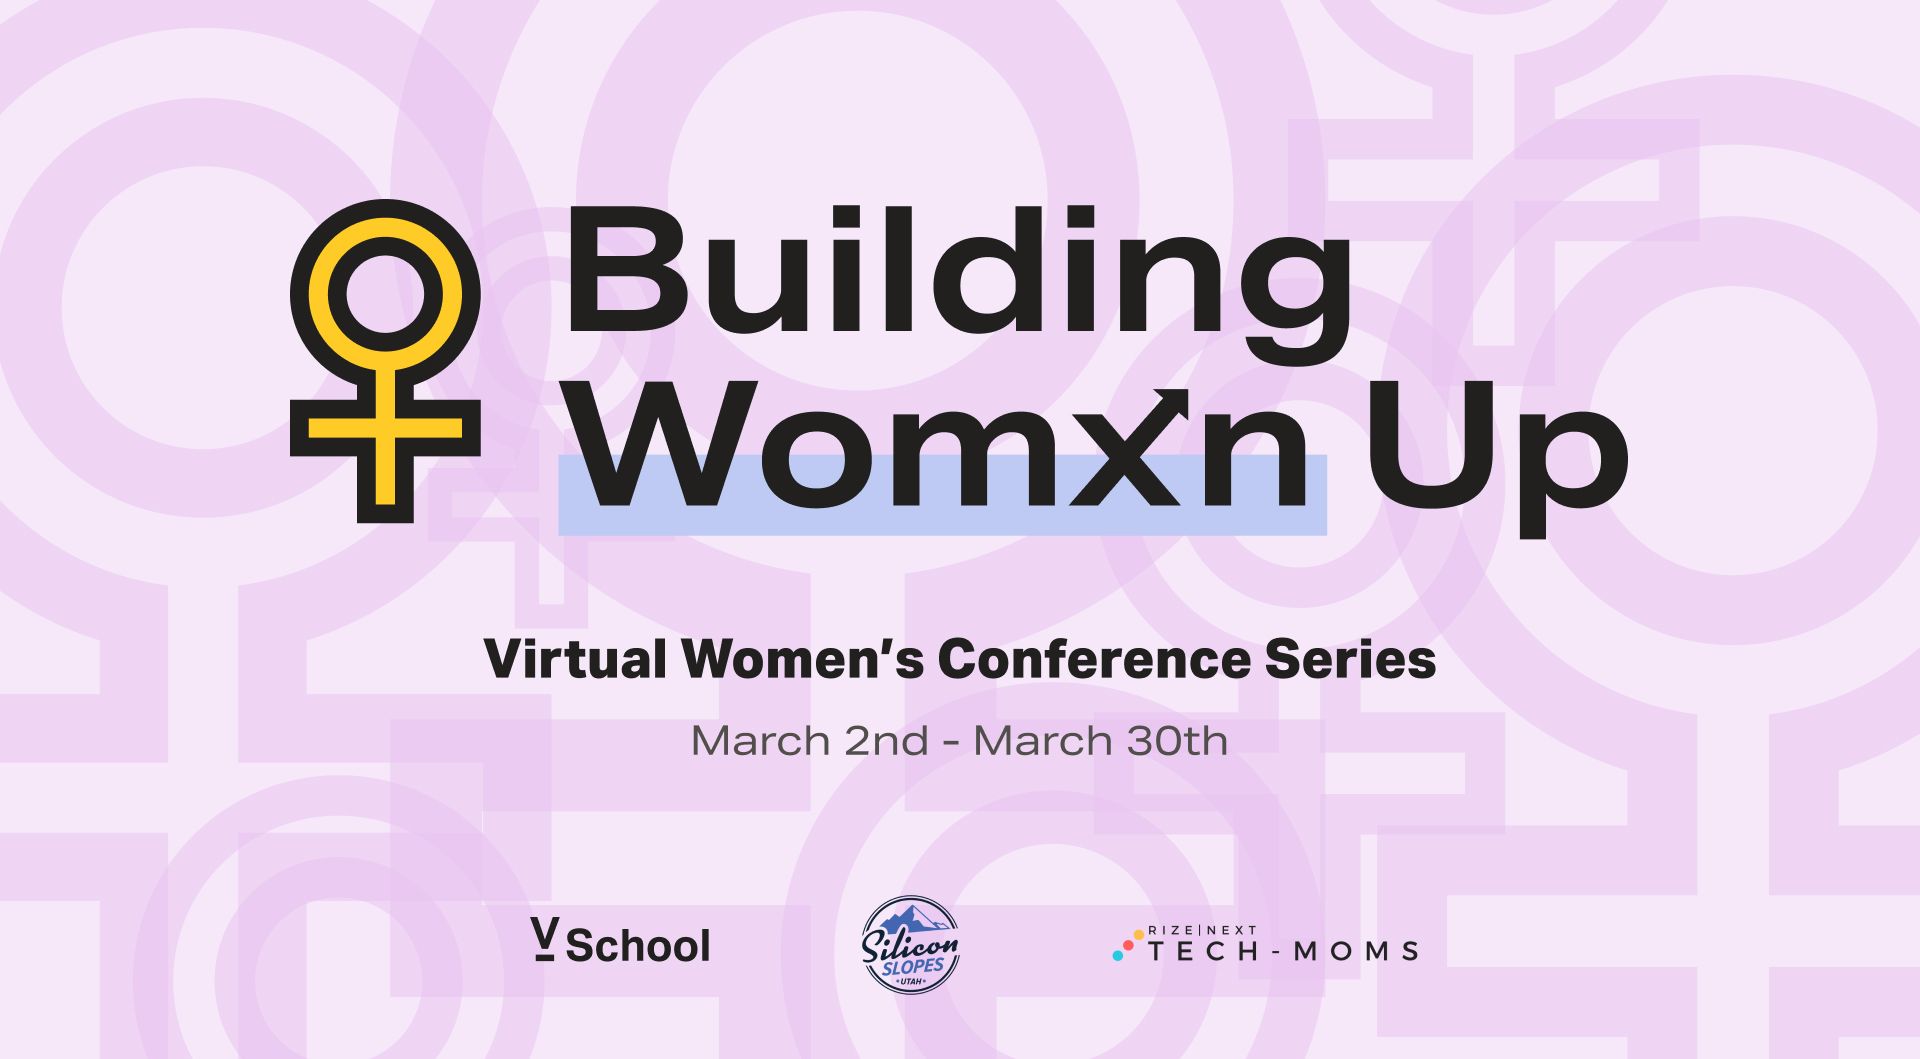 Building Women Up - Virtual Women’s Conference Series